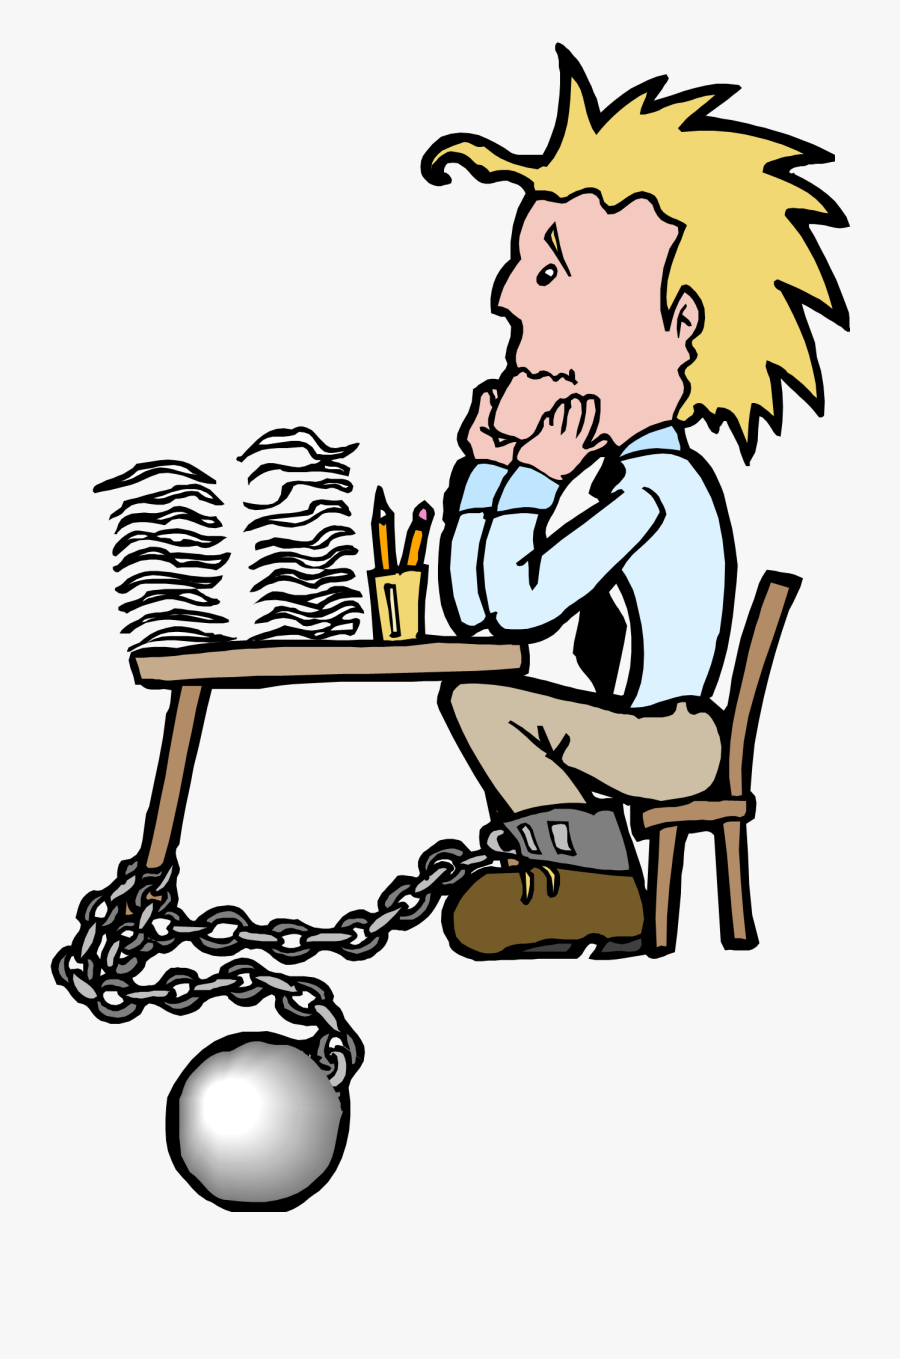 Chained To Desk Cartoon - Chained To Desk Clipart, Transparent Clipart